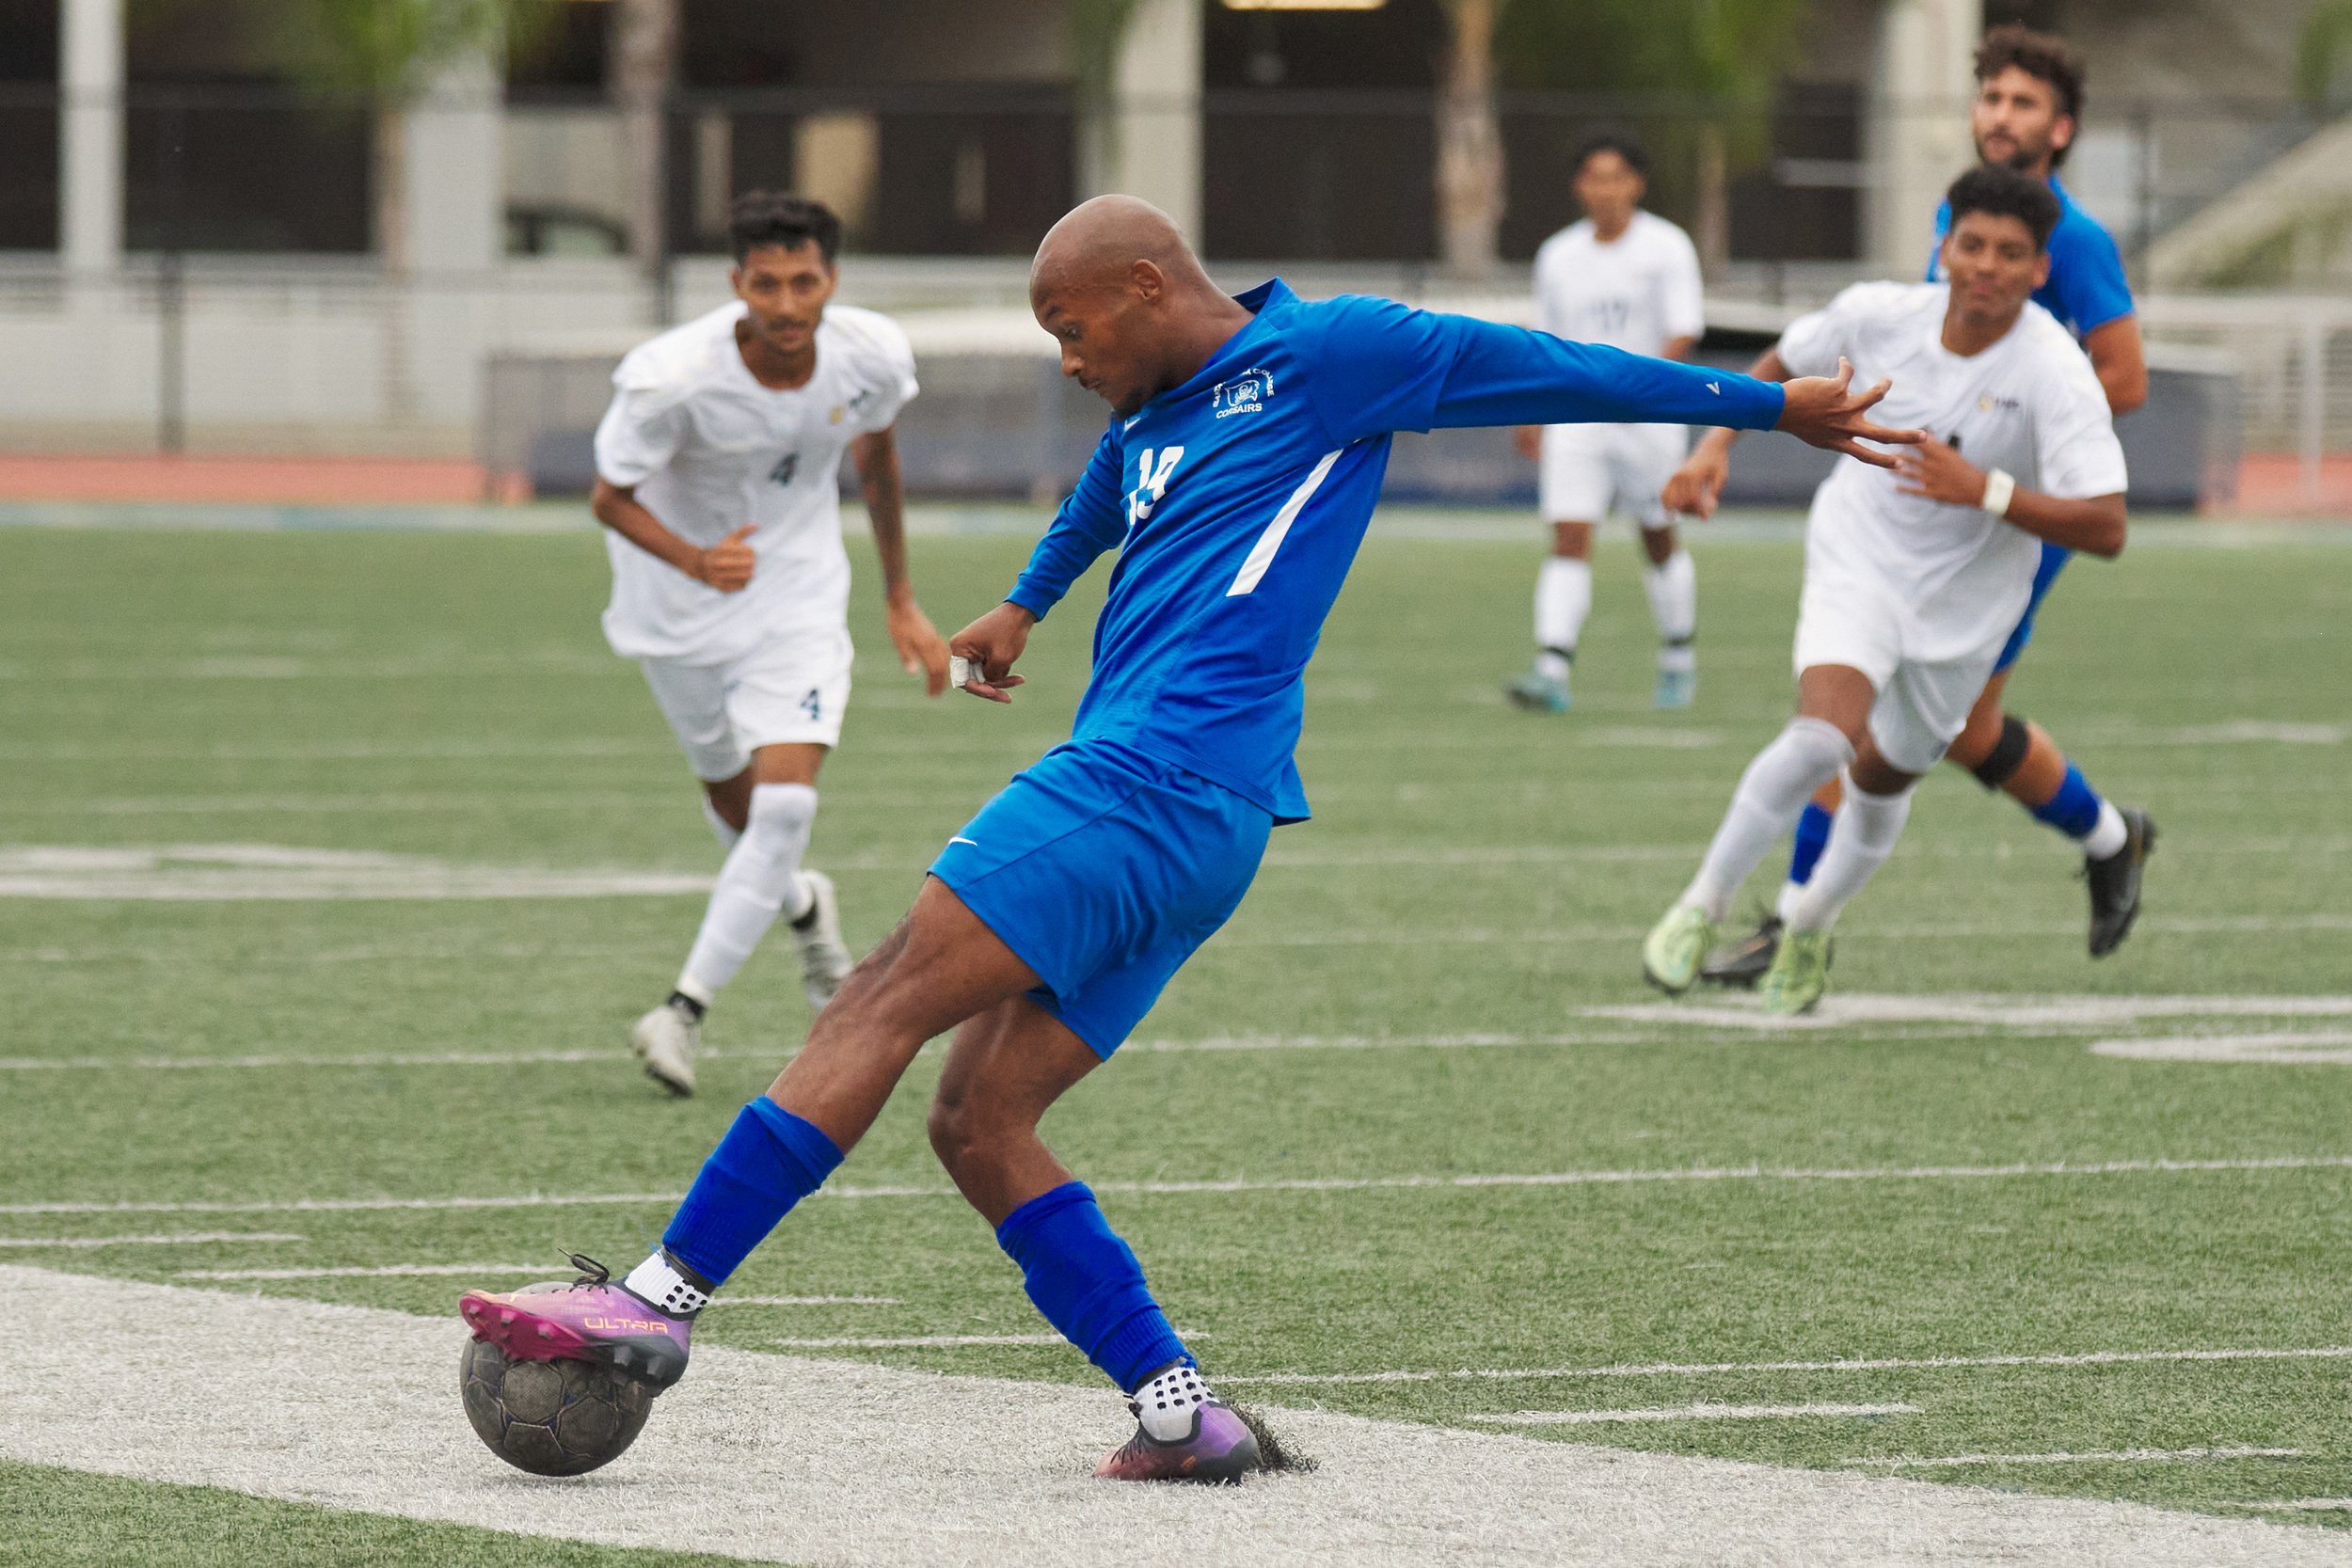  Menes Jahra (center), of the Santa Monica College Corsairs, follwed by Andrew Aguiarcorona (left) and Edwin Gonzales (right), of the Los Angeles Harbor College Seahawks, during the men's soccer match on Friday, September, 9, 2022, at Corsair Field i